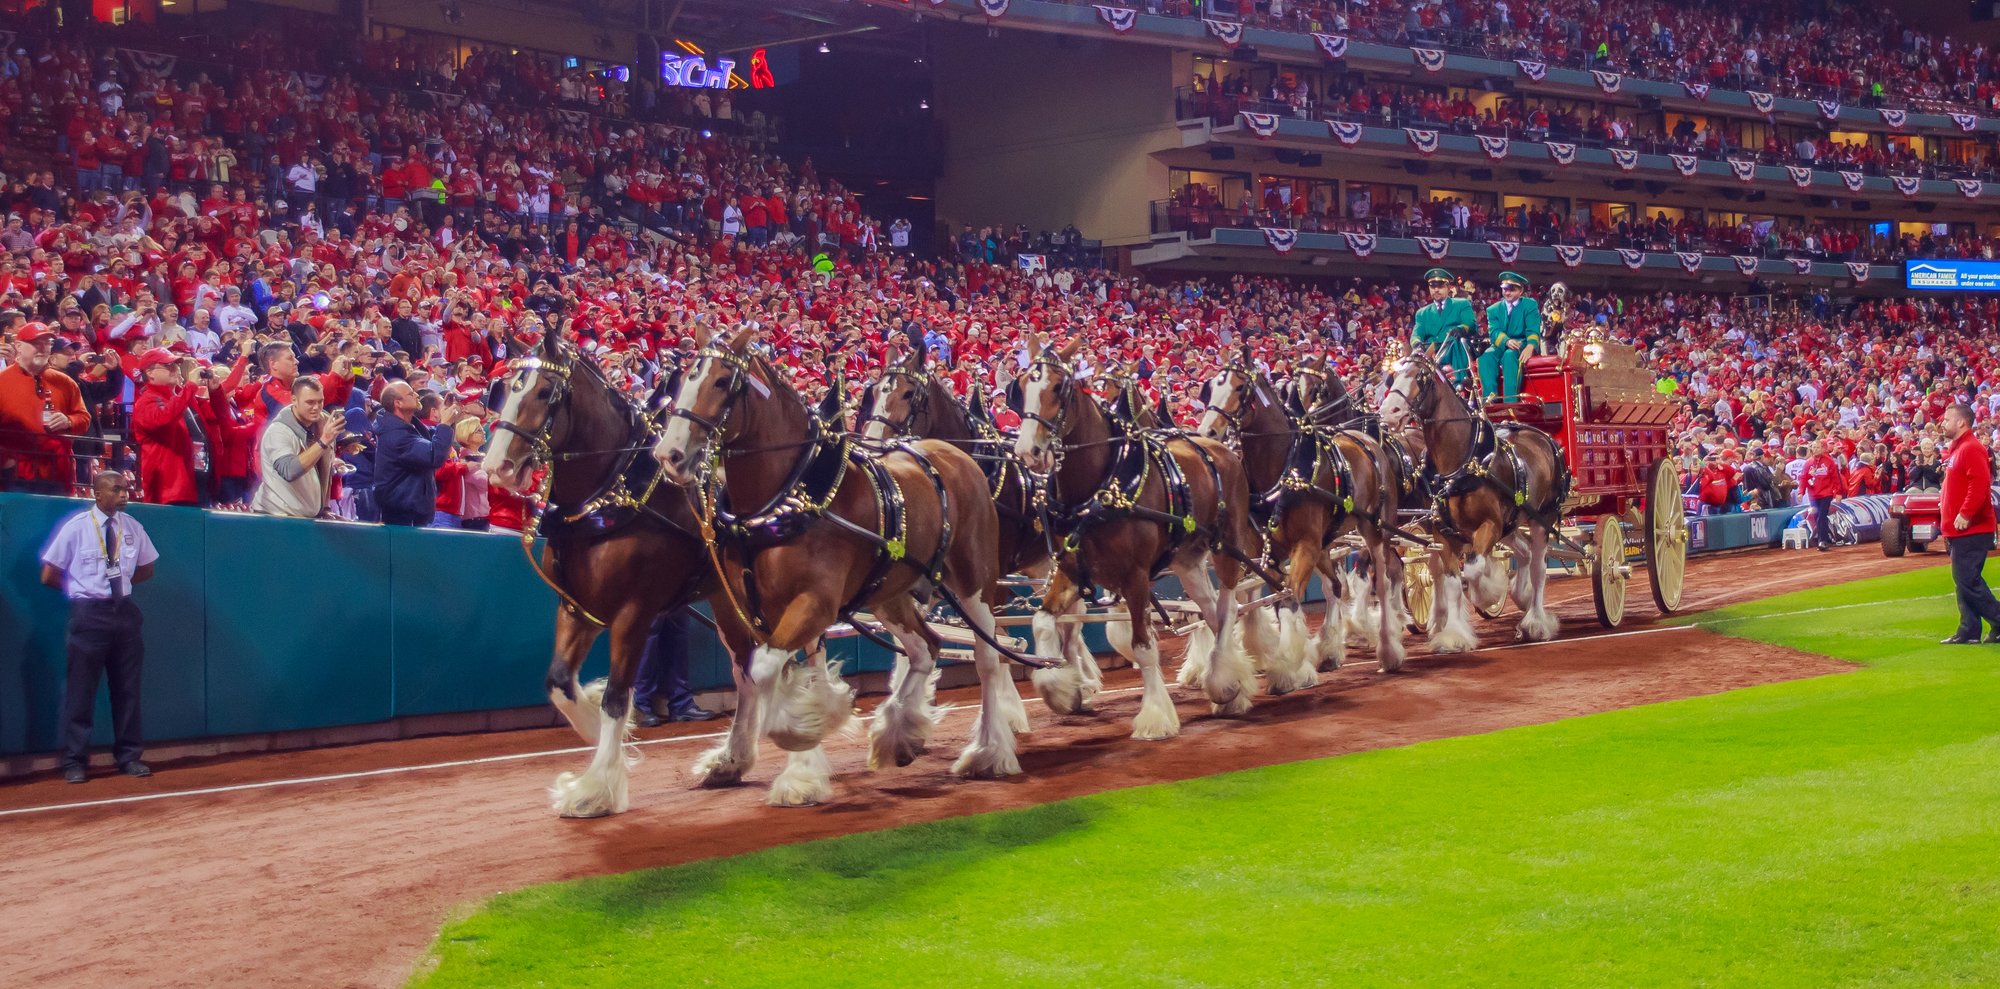 Anheuser-Busch Celebrates 90 Years of the World-Famous Budweiser Clydesdales